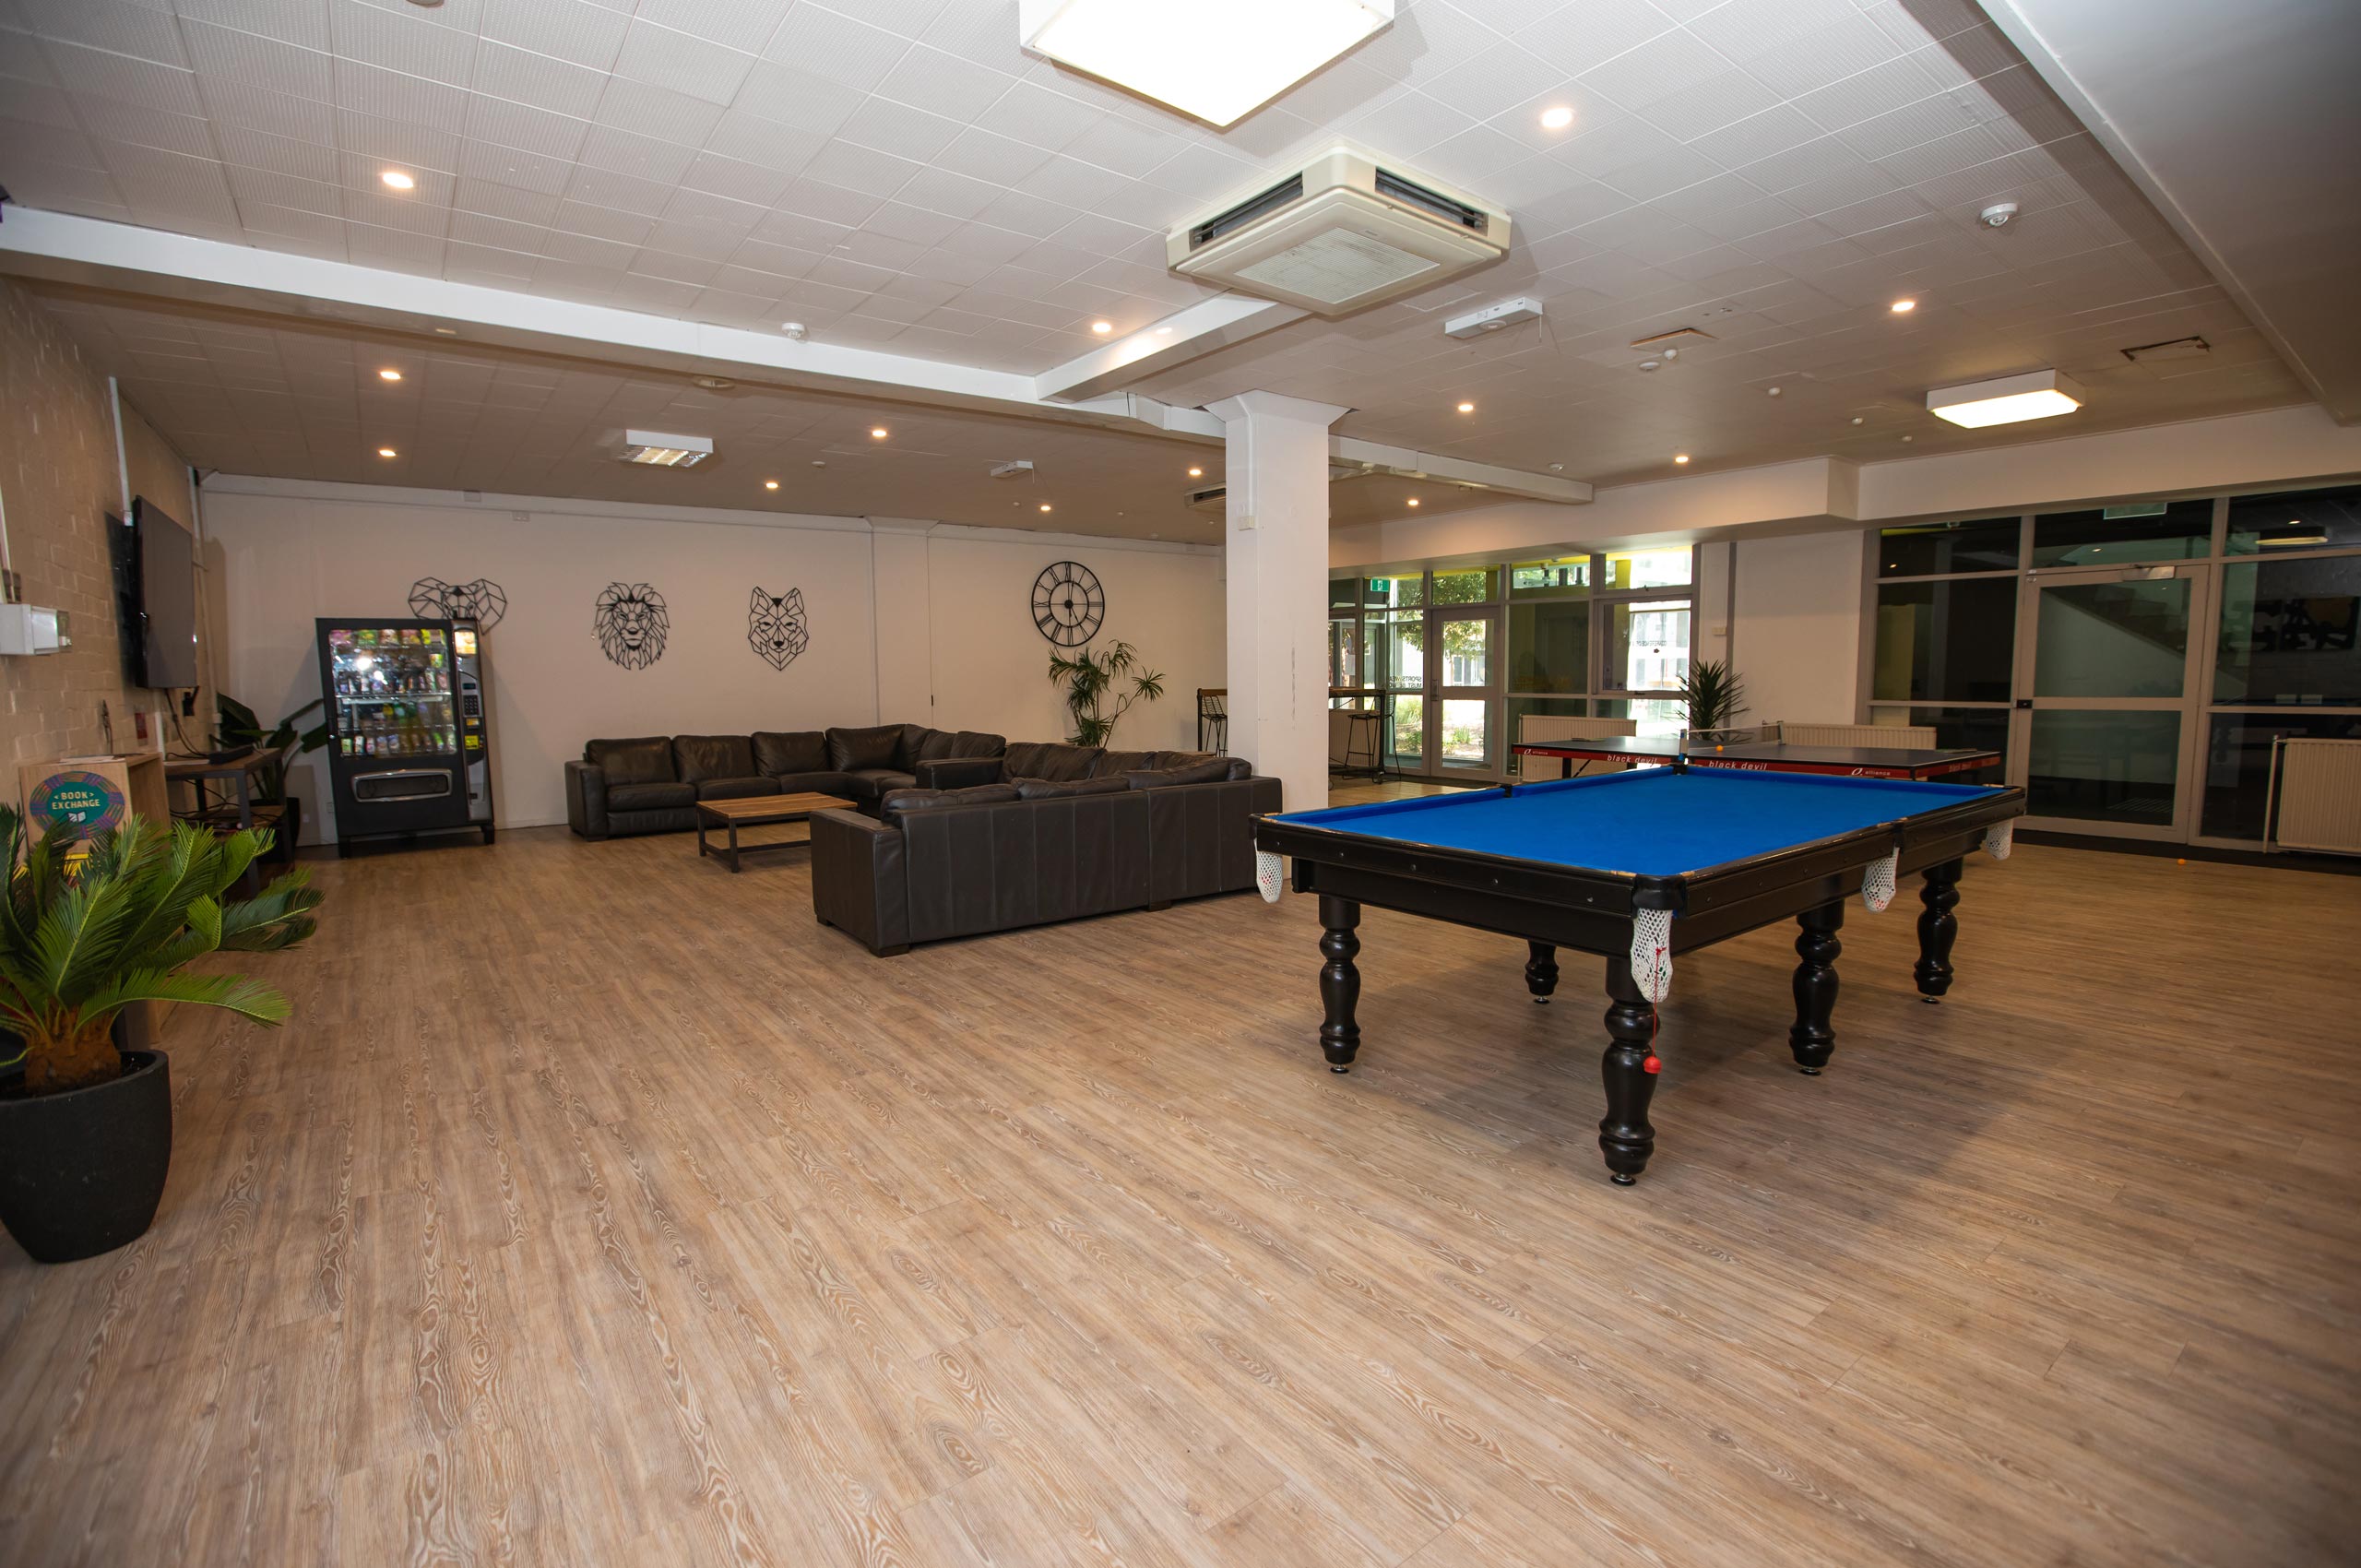 Common room for socialising and entertainment. 